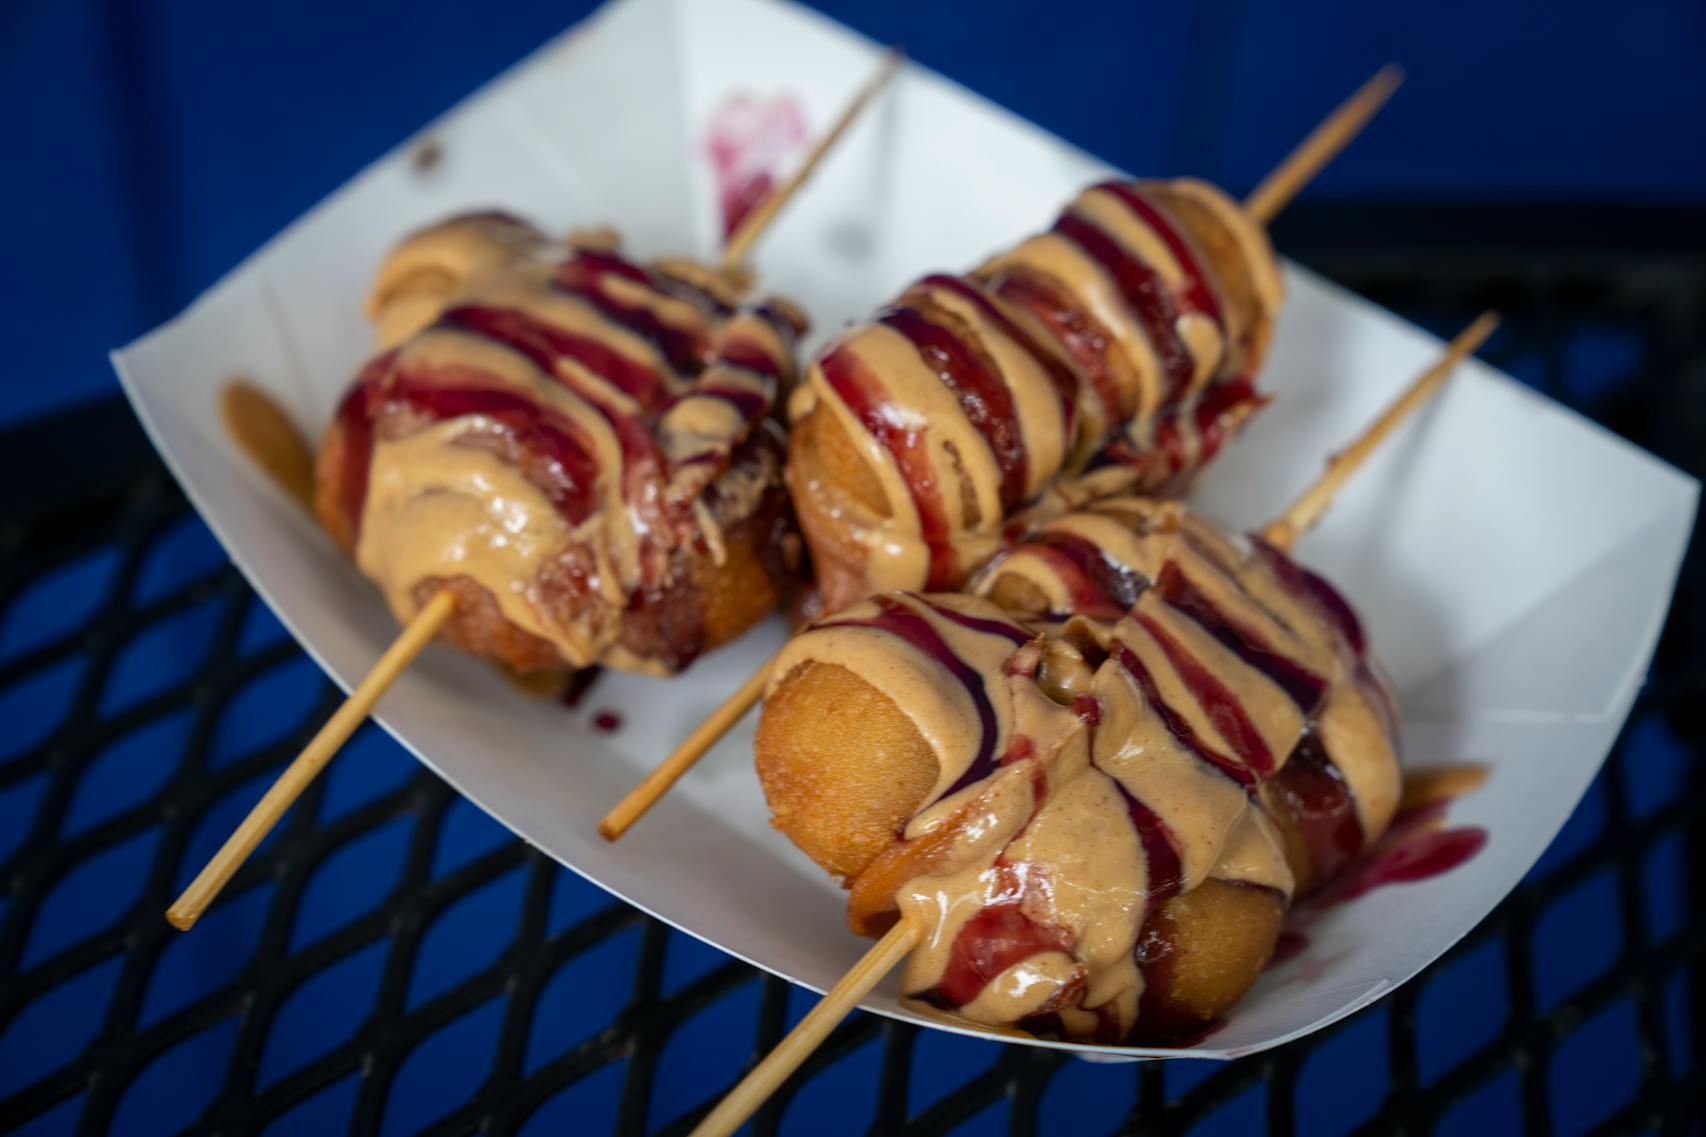 Donut delights from Coasters. The new foods of the 2023 Minnesota State Fair photographed on the first day of the fair in Falcon Heights, Minn. on Tuesday, Aug. 8, 2023. ] LEILA NAVIDI • leila.navidi@startribune.com